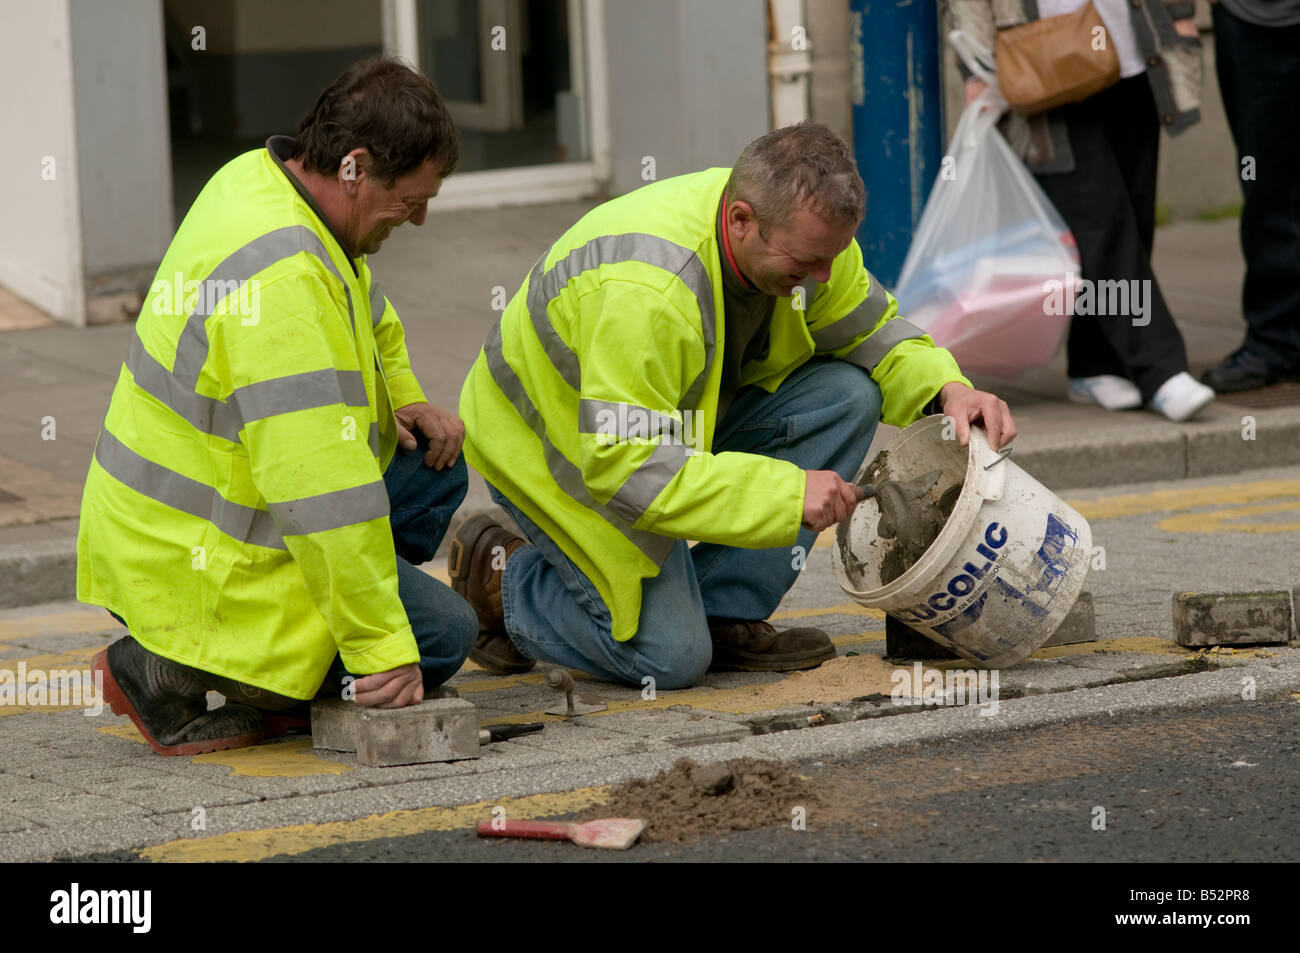 Two local authority workers repairing pavement wearing bright yellow high visibility jackets kneeling down, UK Stock Photo